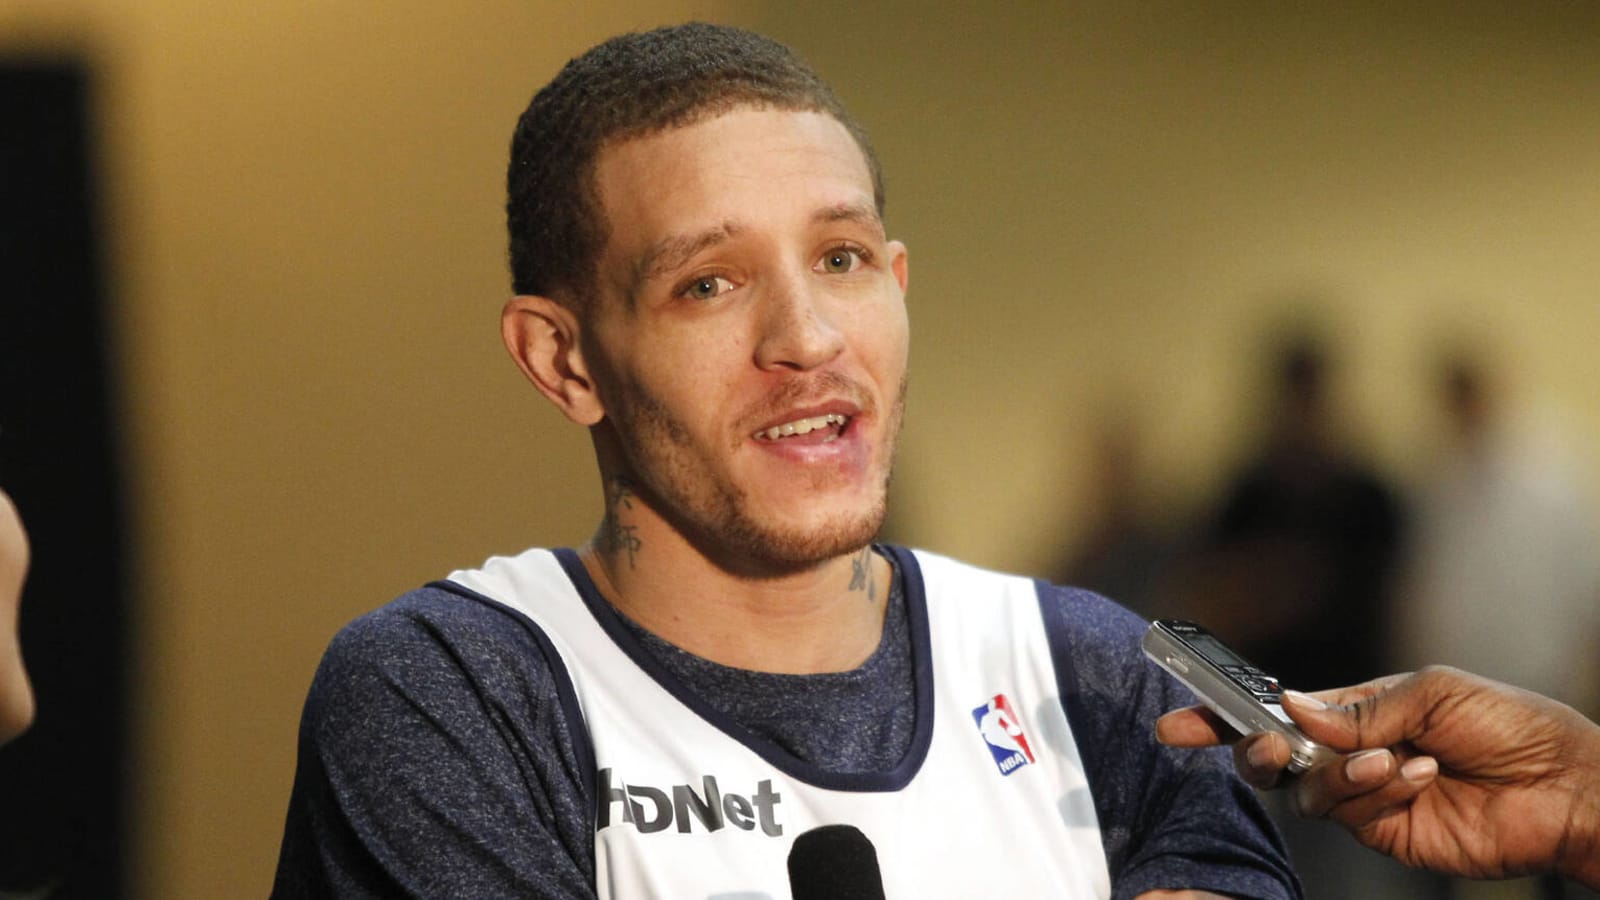 Encouraging video shows Delonte West playing basketball again